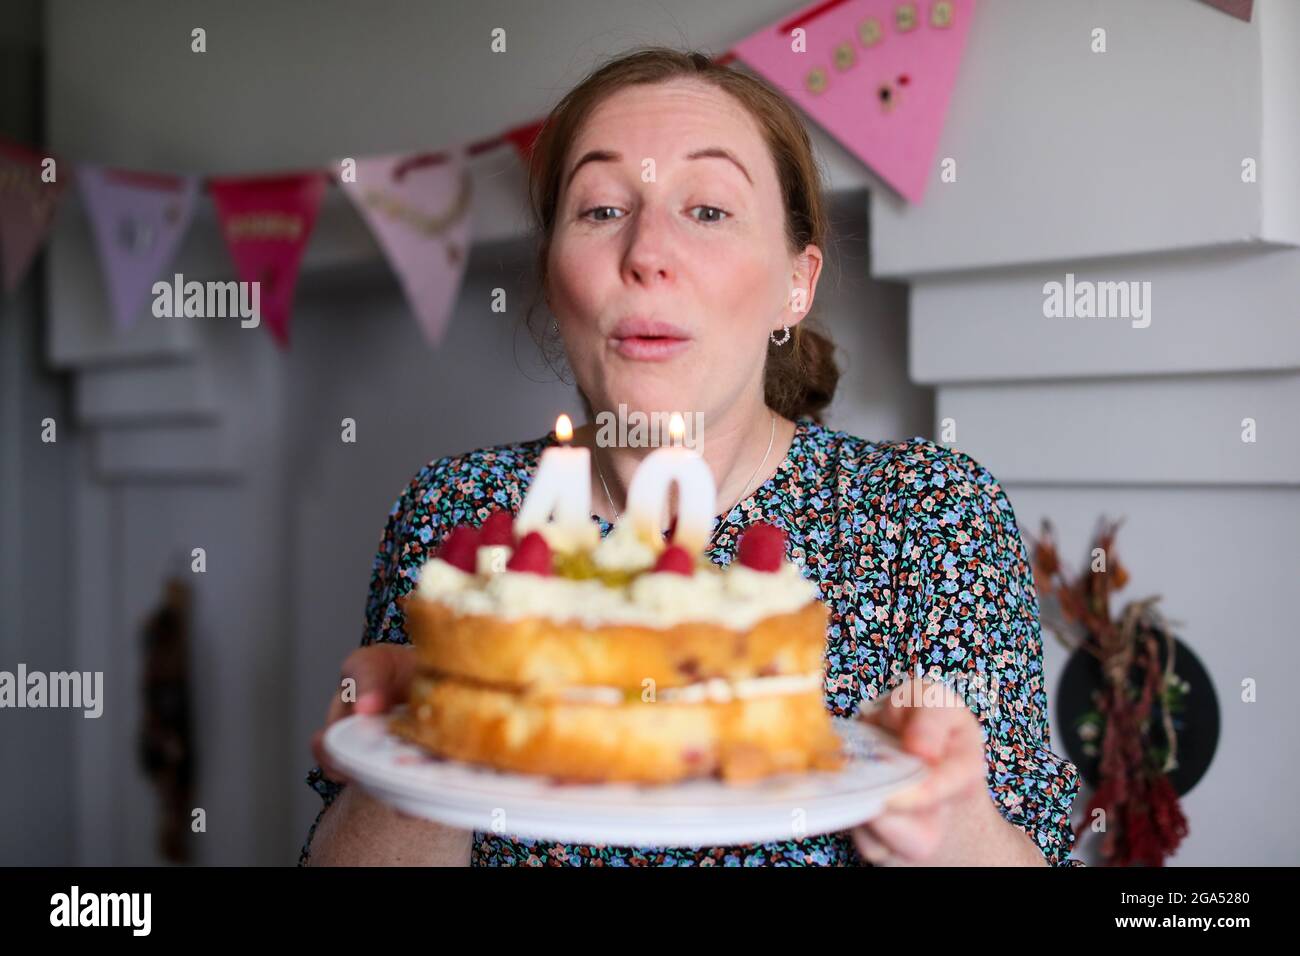 A woman celebrates her 40th birthday by blowing out the candles on her birthday cake in Armoy, County Antrim, Northern Ireland. Stock Photo